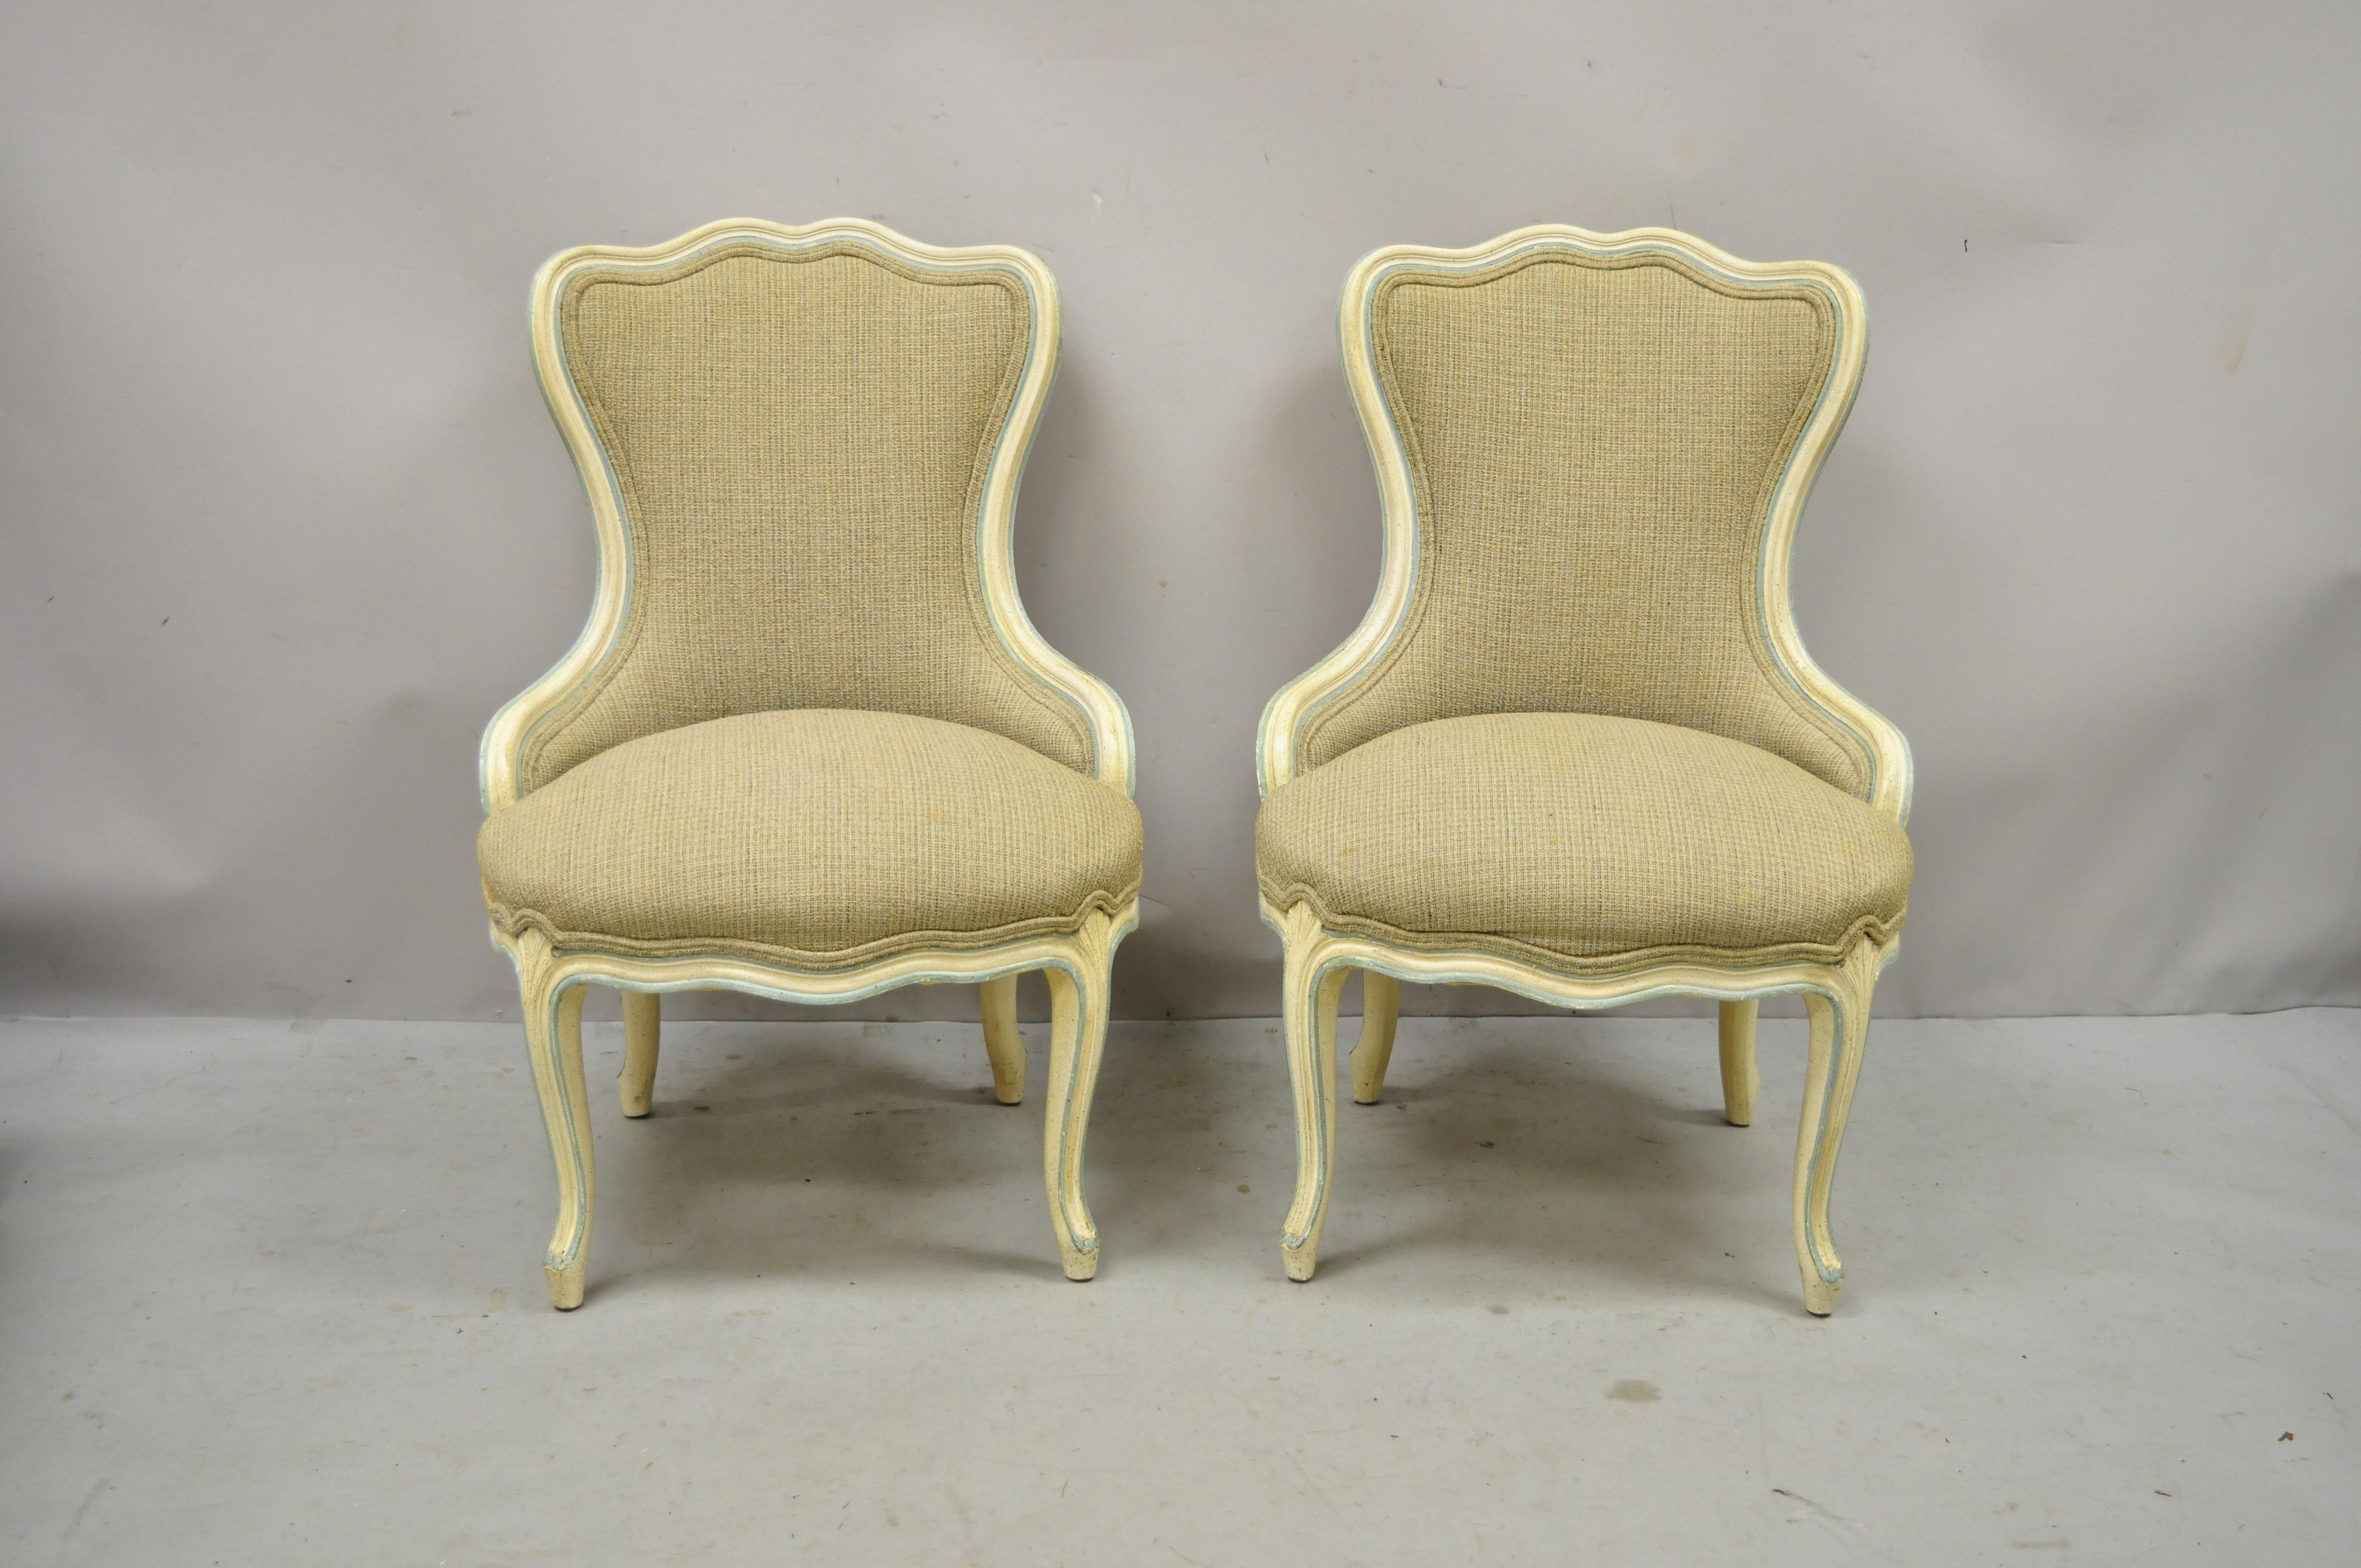 Vintage French Provincial Louis XV style cream and blue hiprest boudoir slipper Chairs - a Pair. Item features nice petite size, cream and blue distress painted frames, shapely carved backs, carved hiprest, cabriole legs, very nice vintage pair,